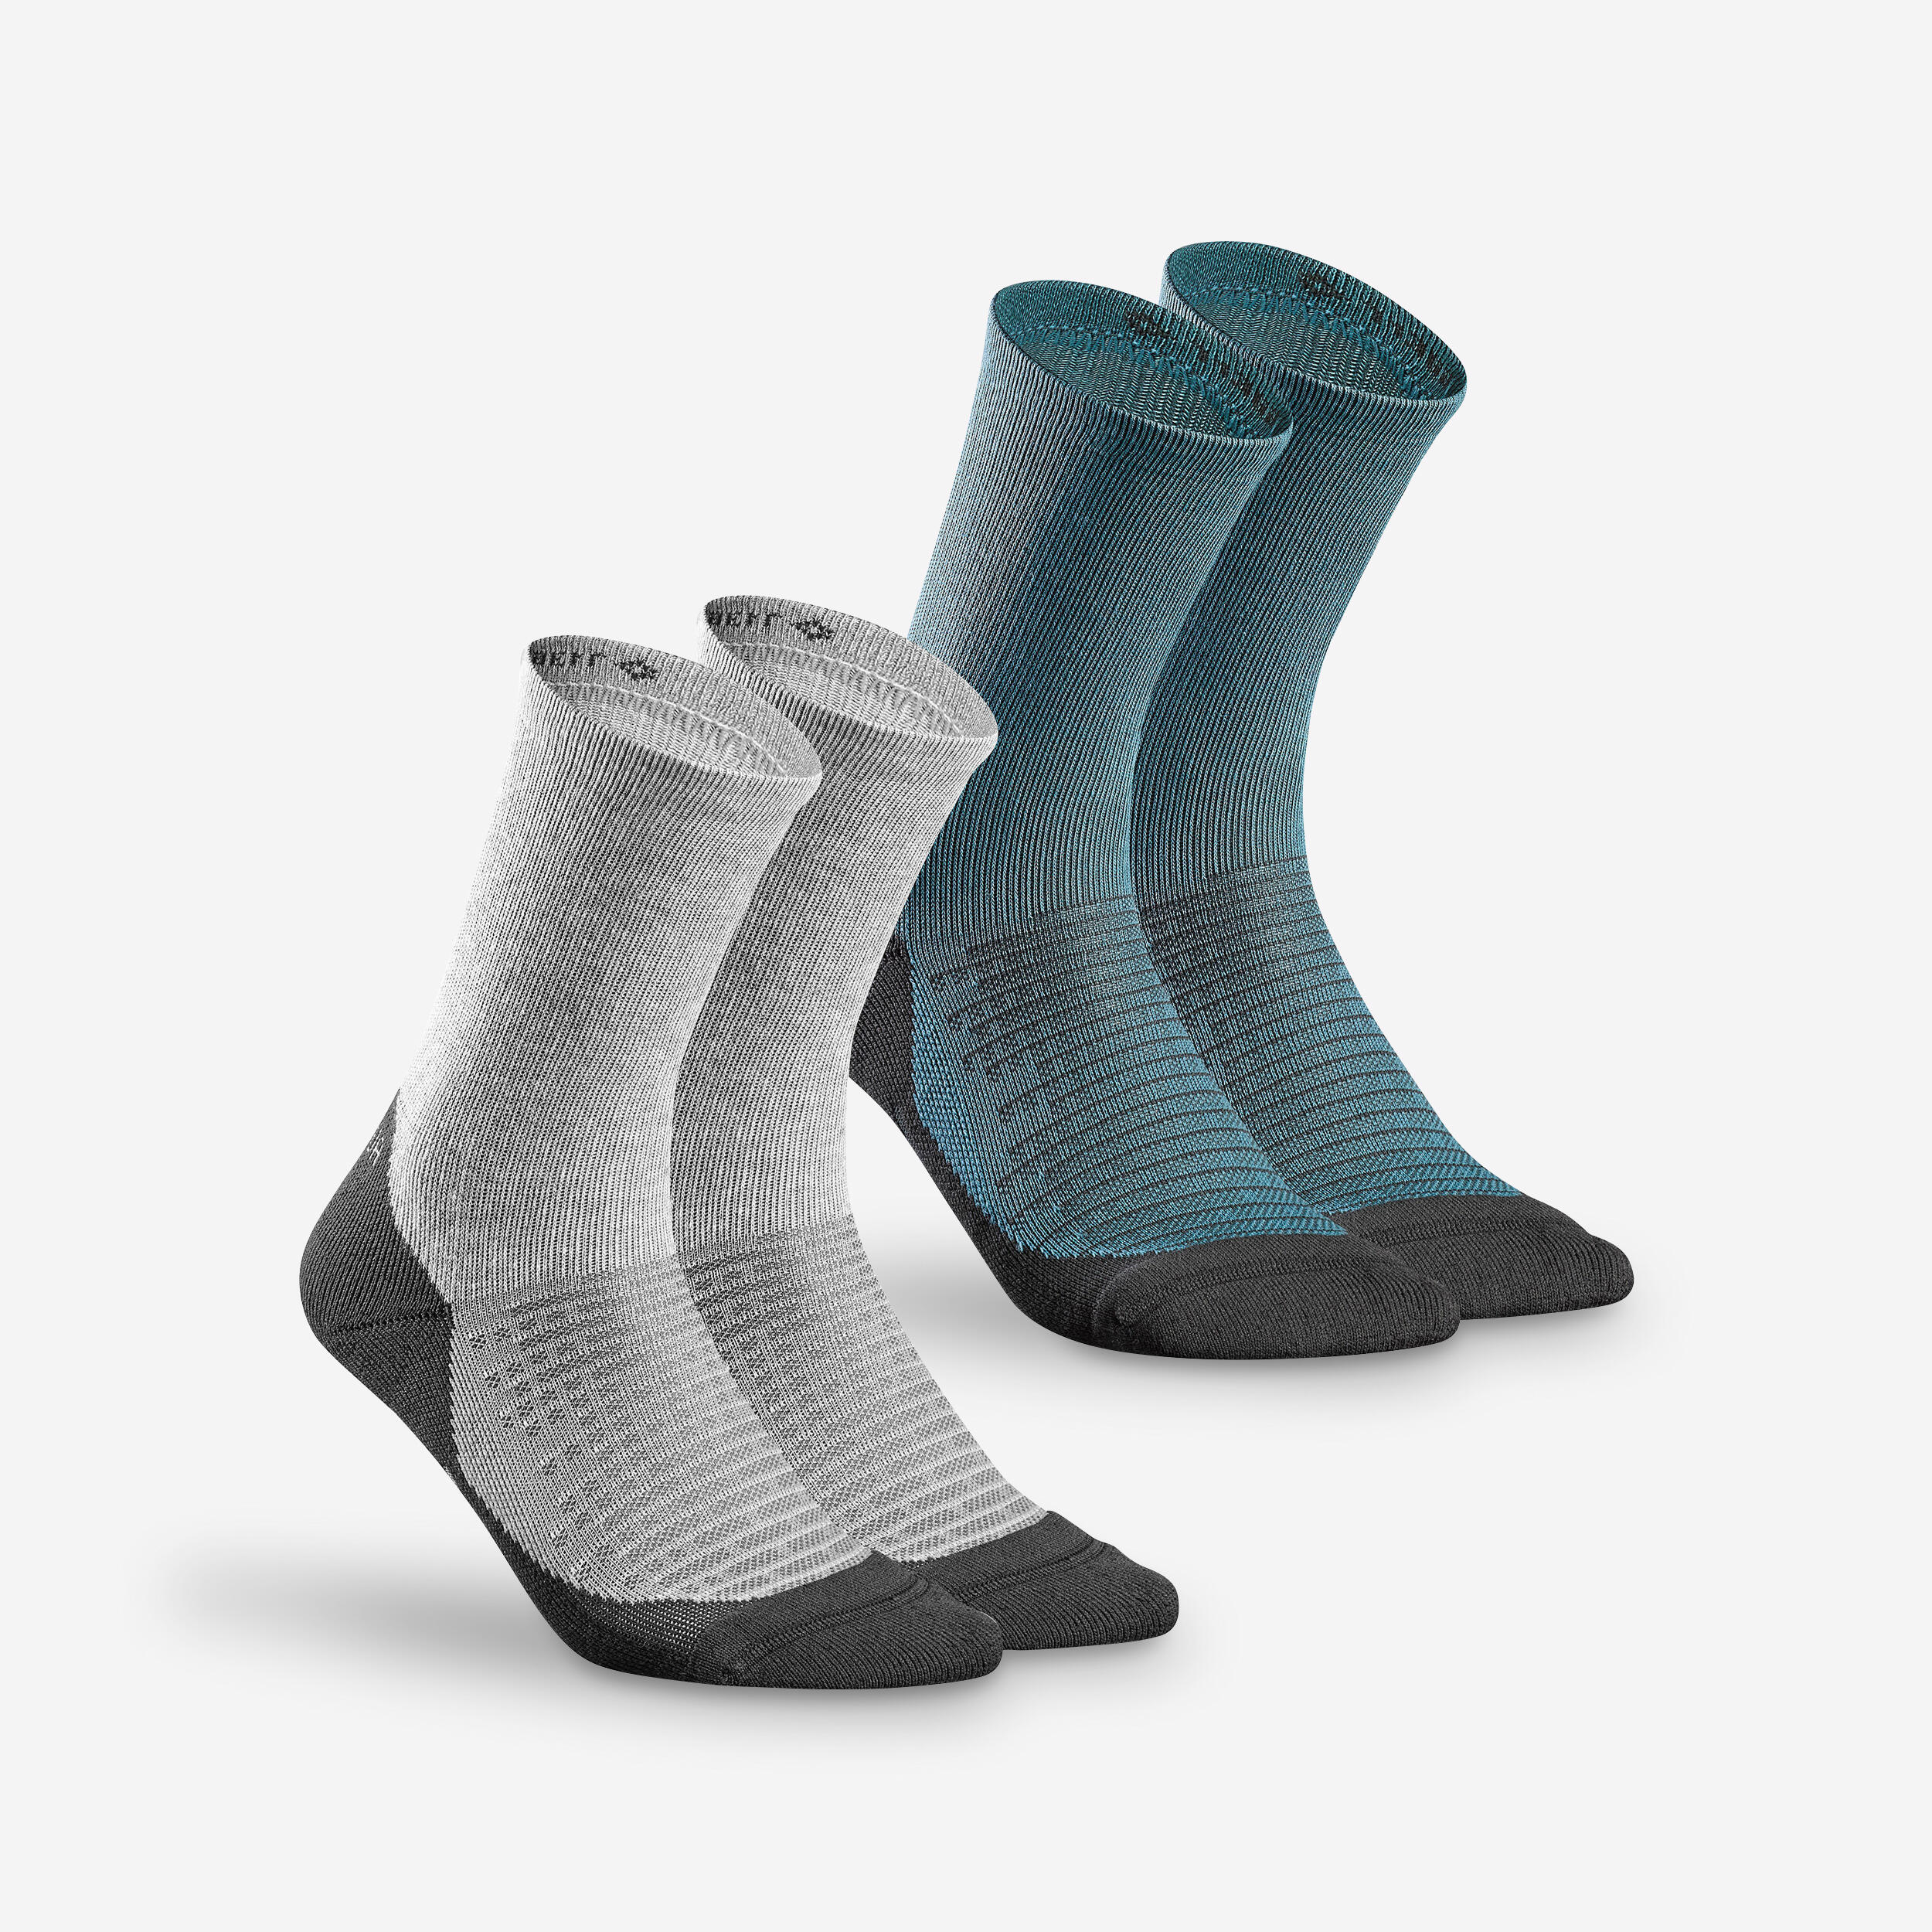 QUECHUA Sock Hike 100 High  - Pack of 2 pairs - Grey and Blue